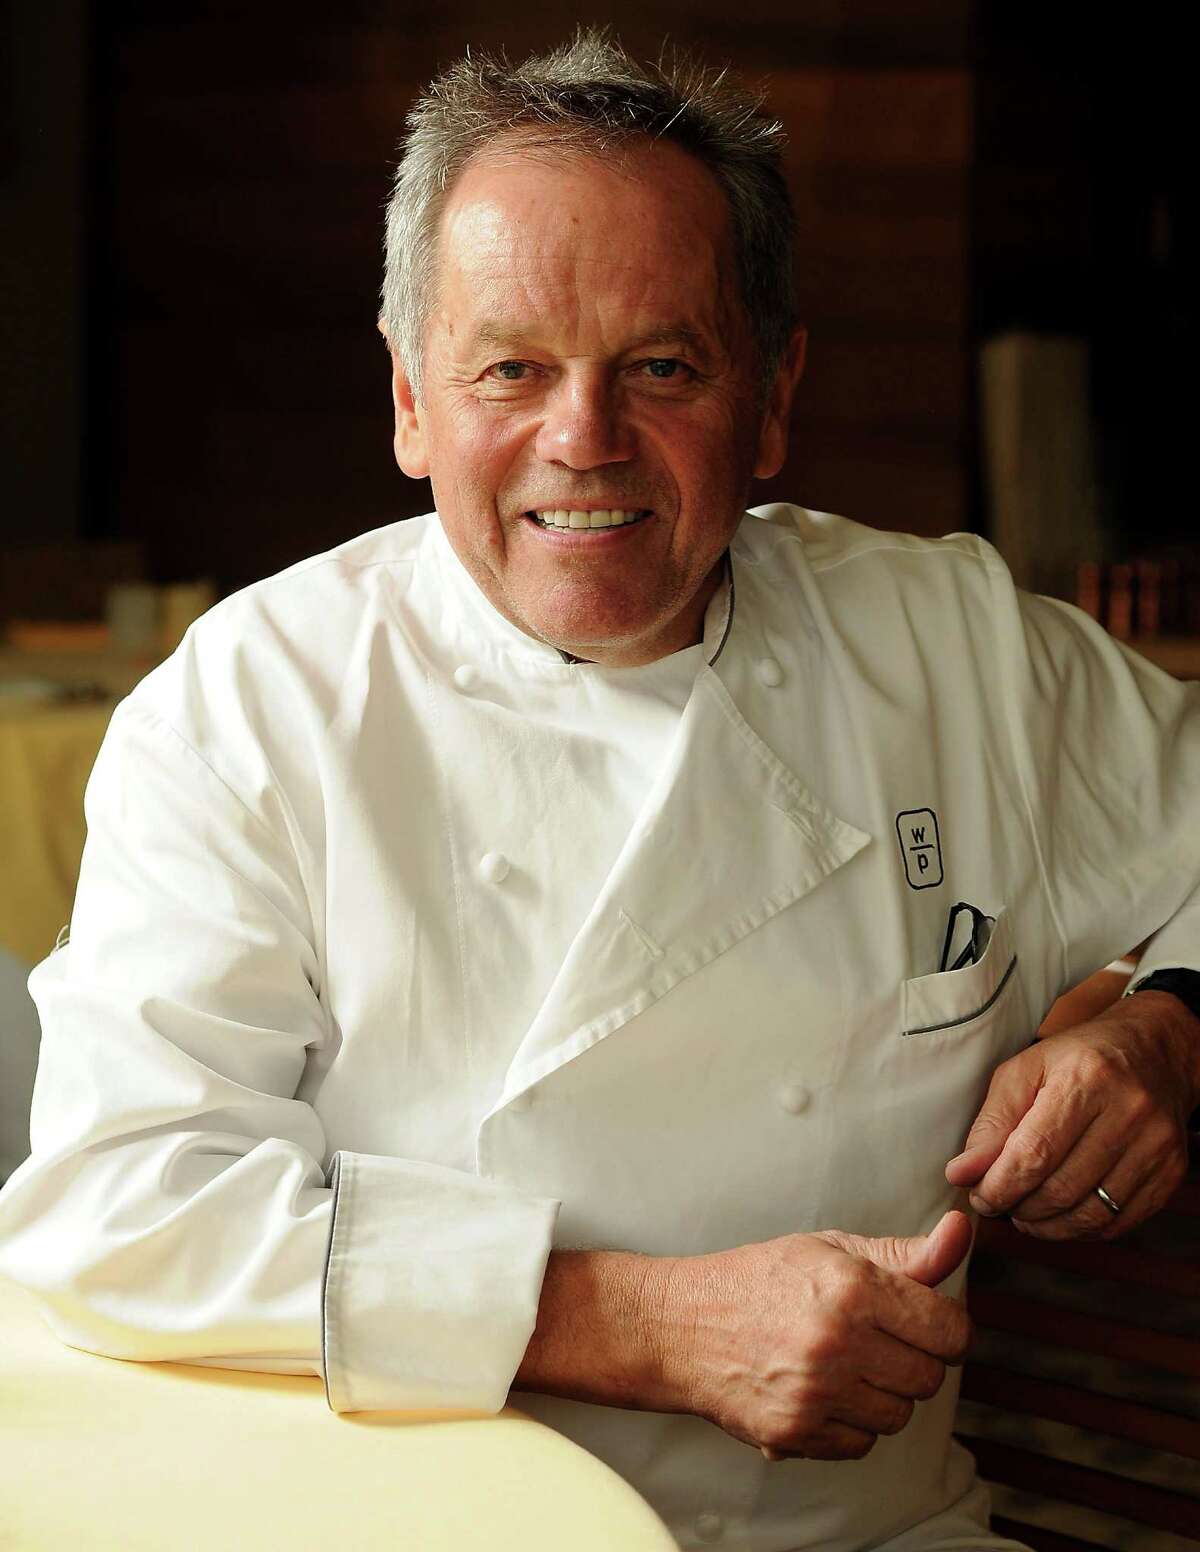 Chef Wolfgang Puck will prepare the menu for the Houston Symphony's Wine Dinner and Collector's Auction on March13.